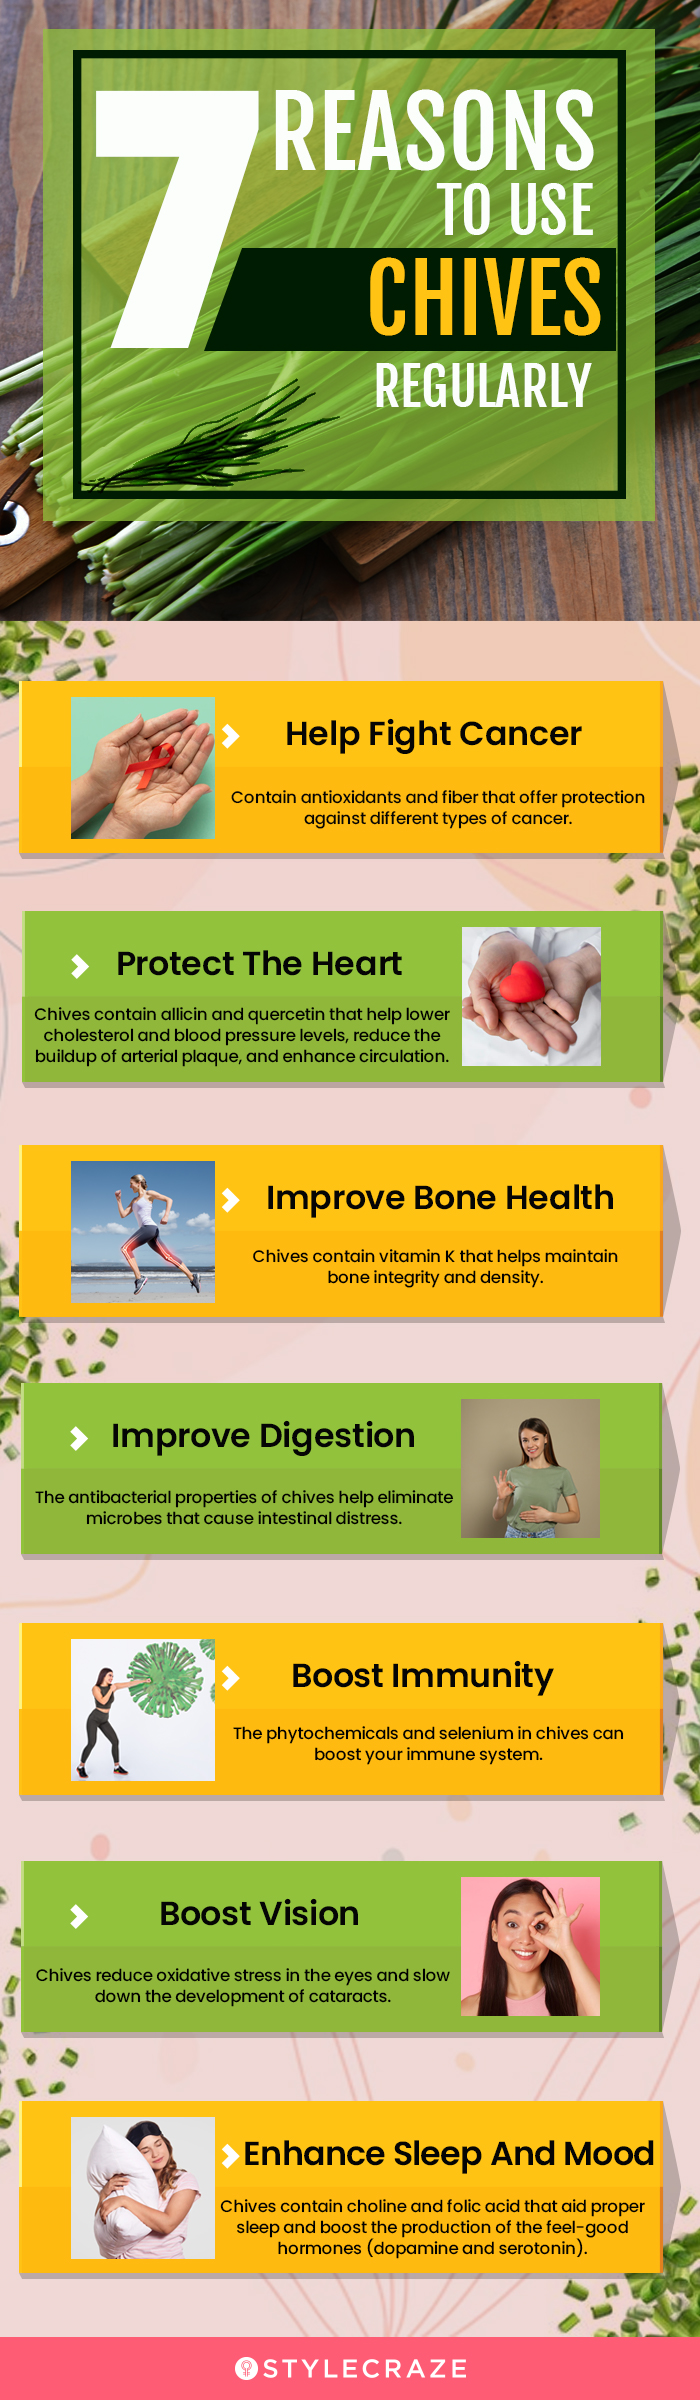 7 reasons to use chives regularly (infographic)